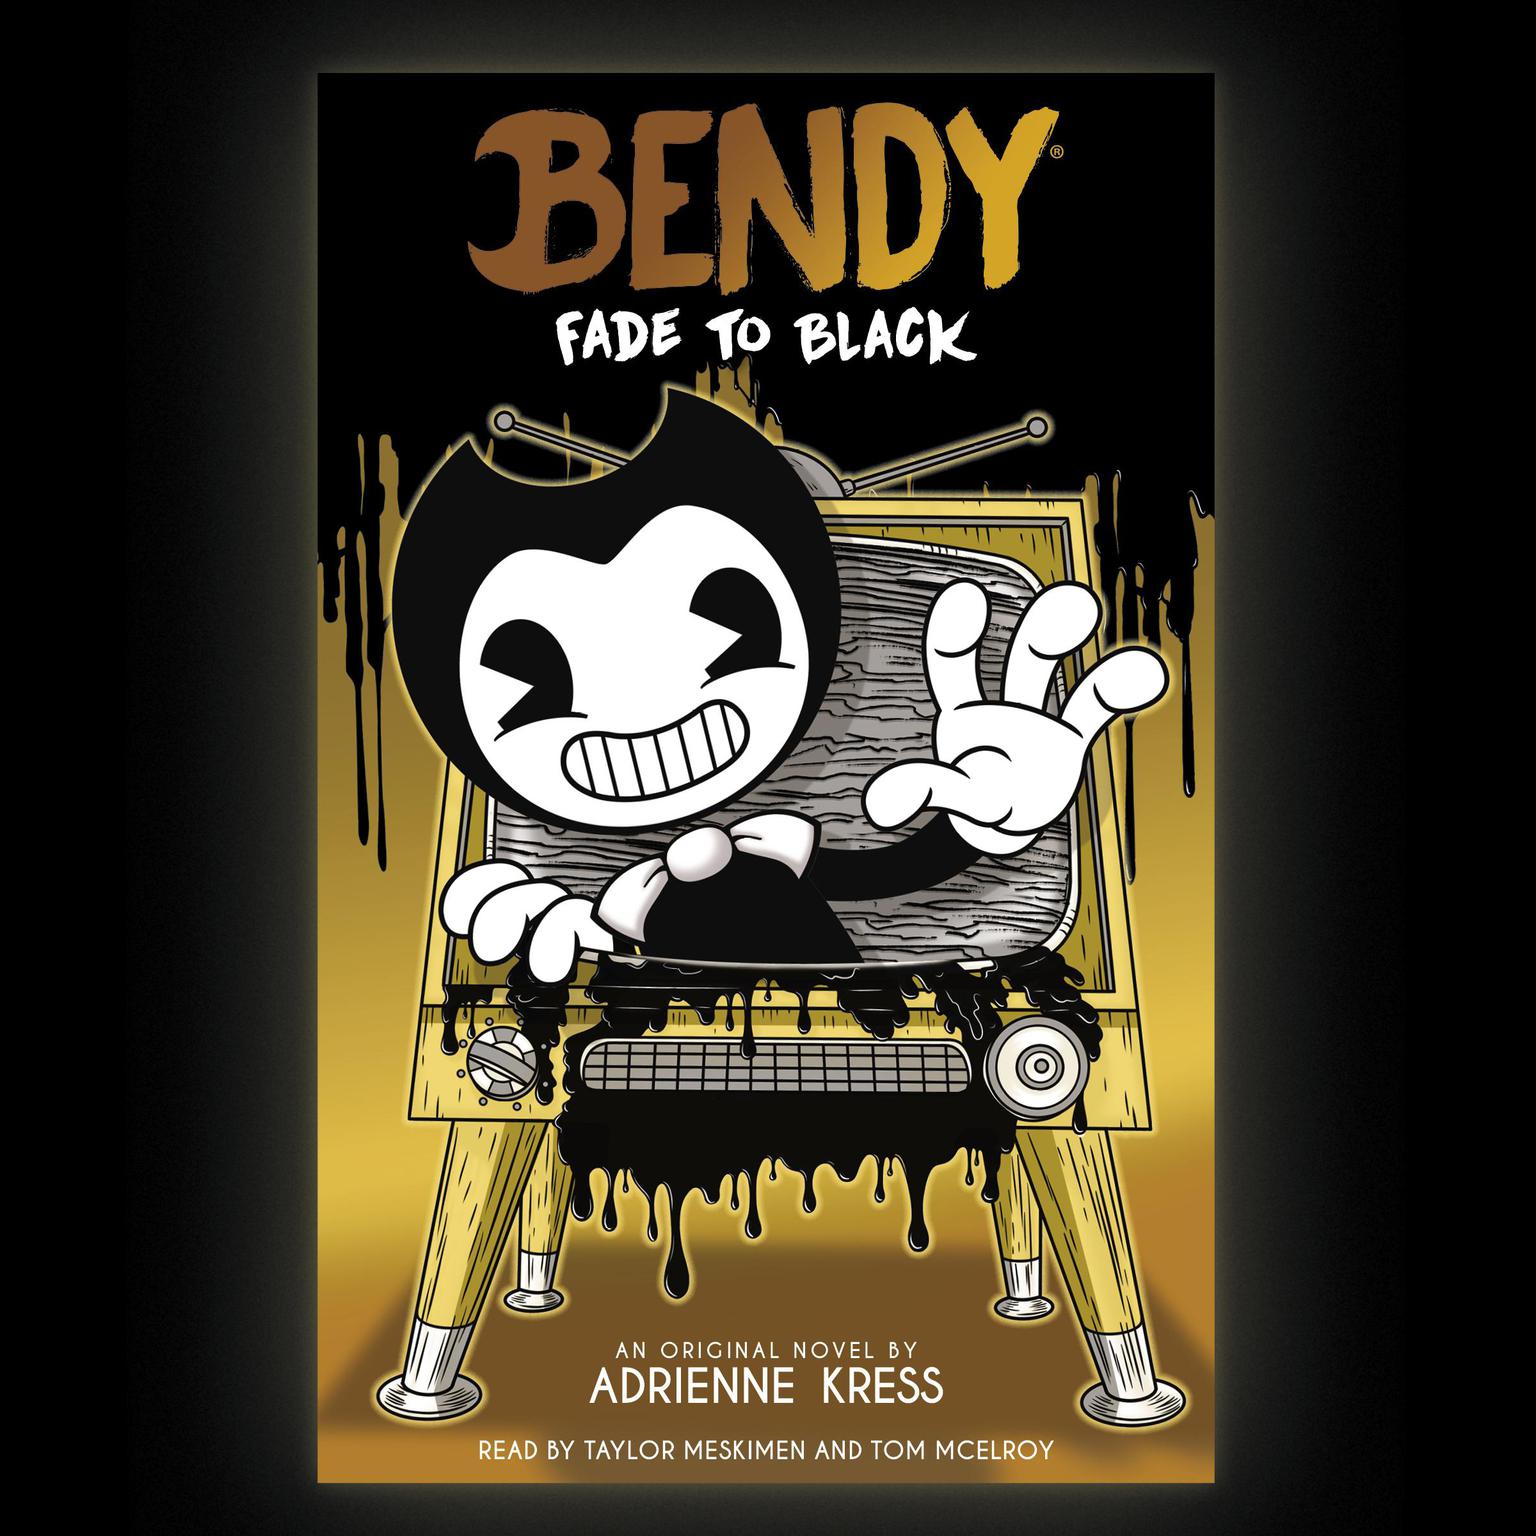 Fade to Black: An AFK Book (Bendy #3) Audiobook, by Adrienne Kress